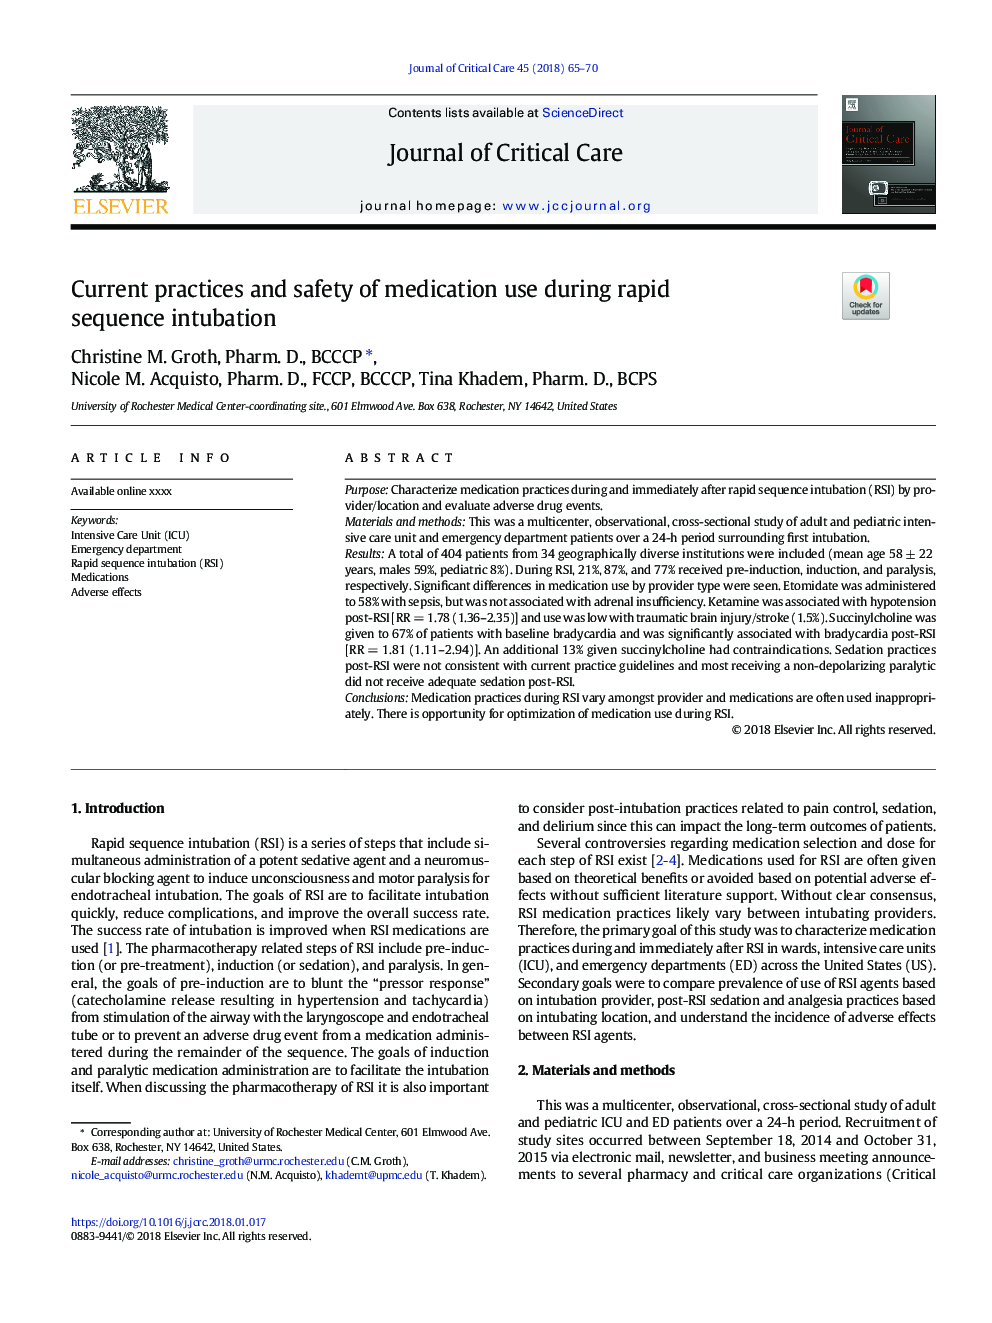 Current practices and safety of medication use during rapid sequence intubation